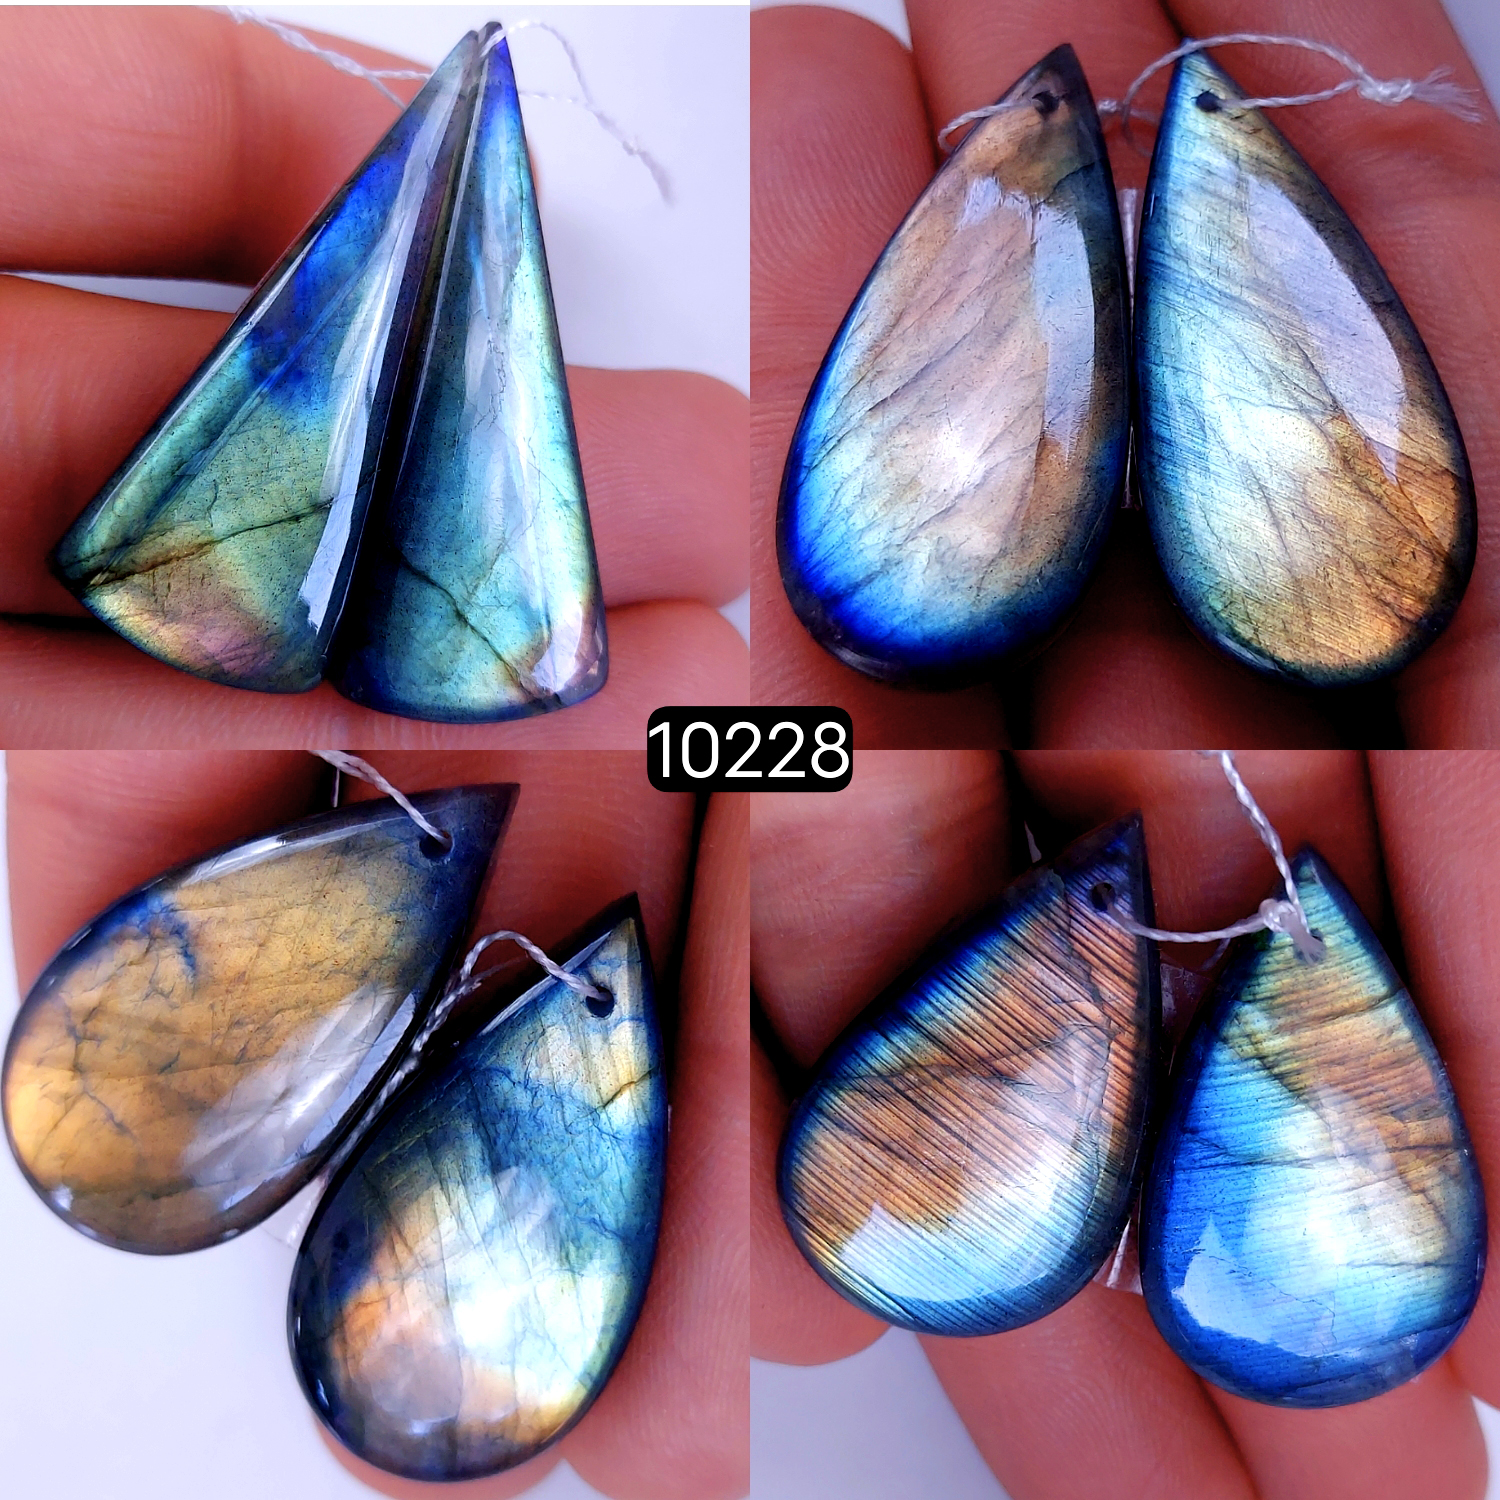 4Pair 195Cts Natural Labradorite Crystal Drill Dangle Drop Earring Pairs Silver Earrings Blue Labradorite Hoop Jewelry  440x15 30x20mm #10228